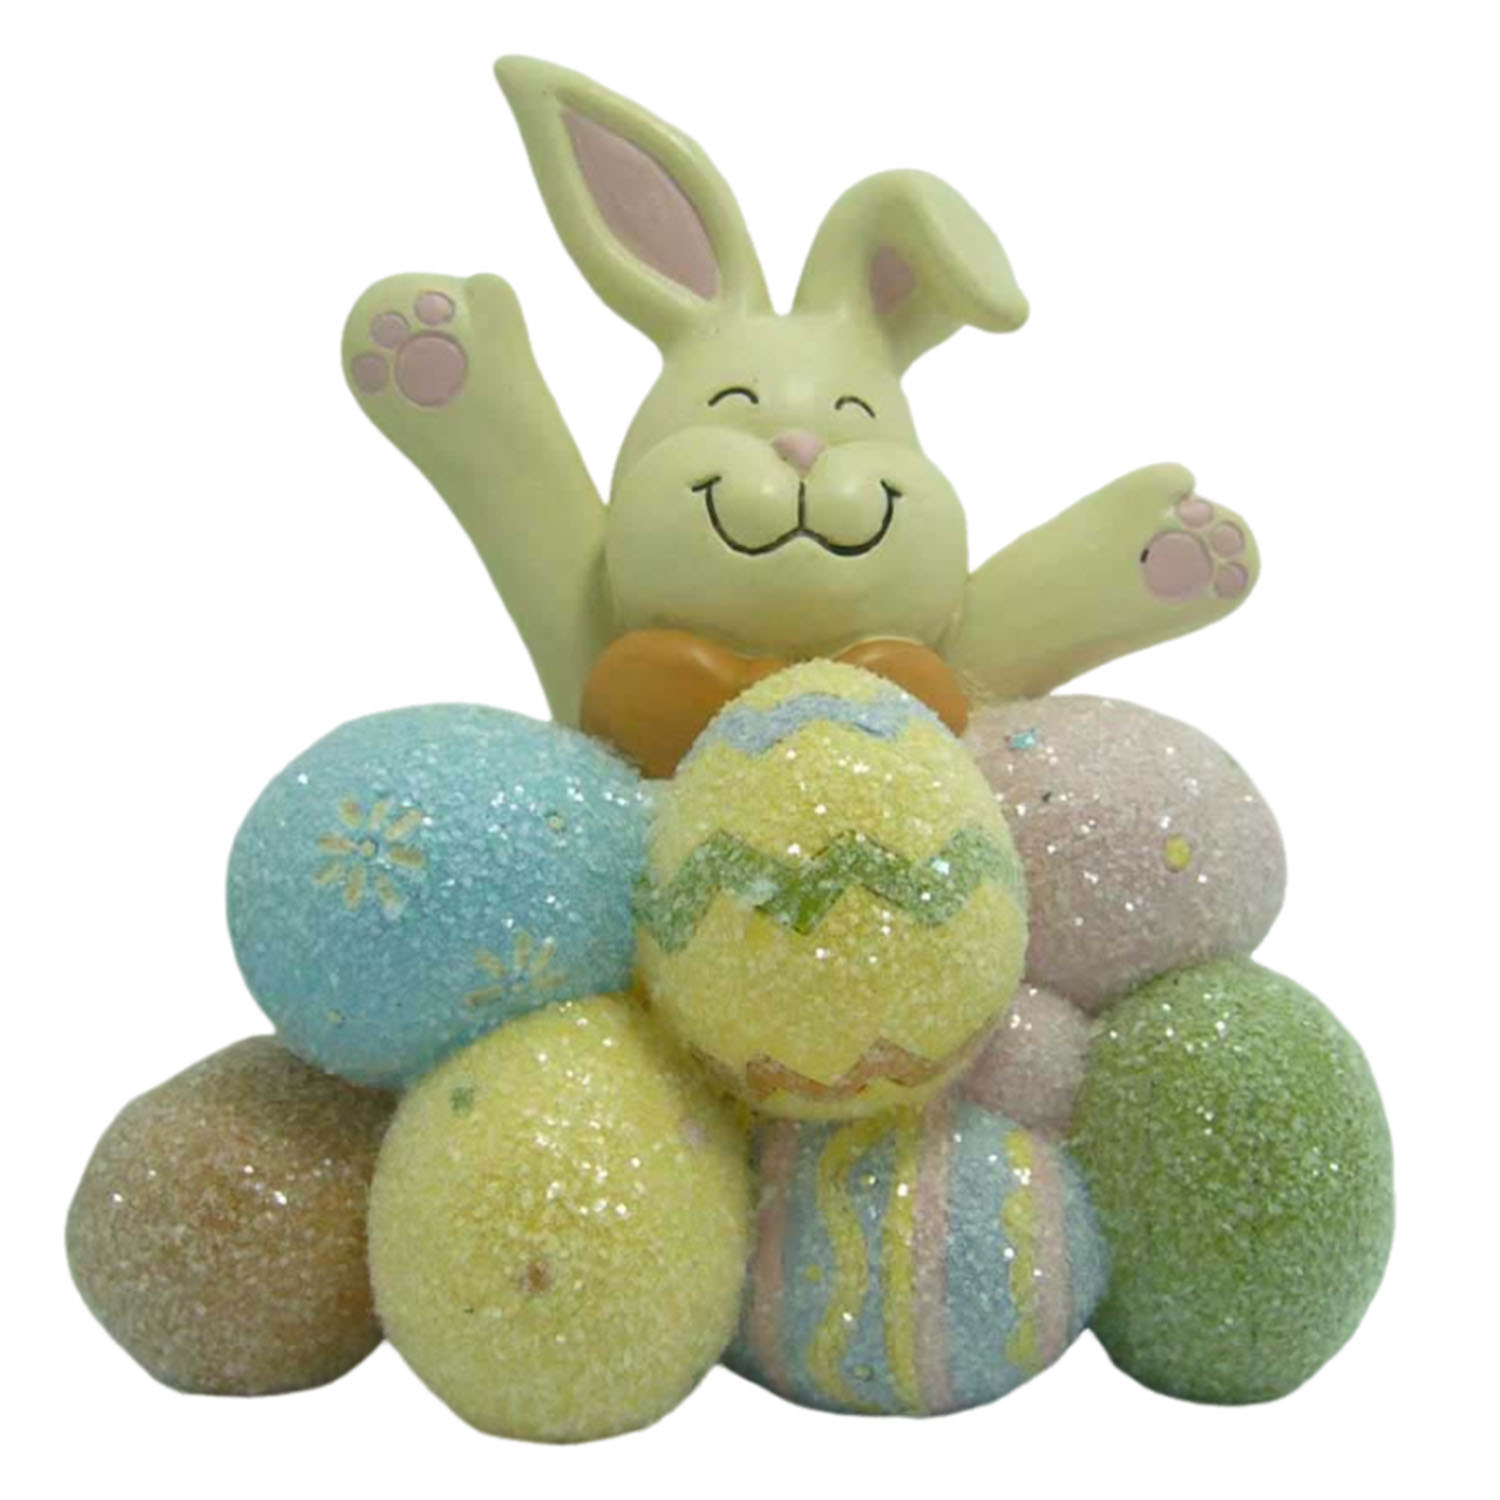 New Arrivals Adorable Easter Bunny Resin Figurine with Colorful Glitter Eggs Perfect Festive Decoration 151-89251